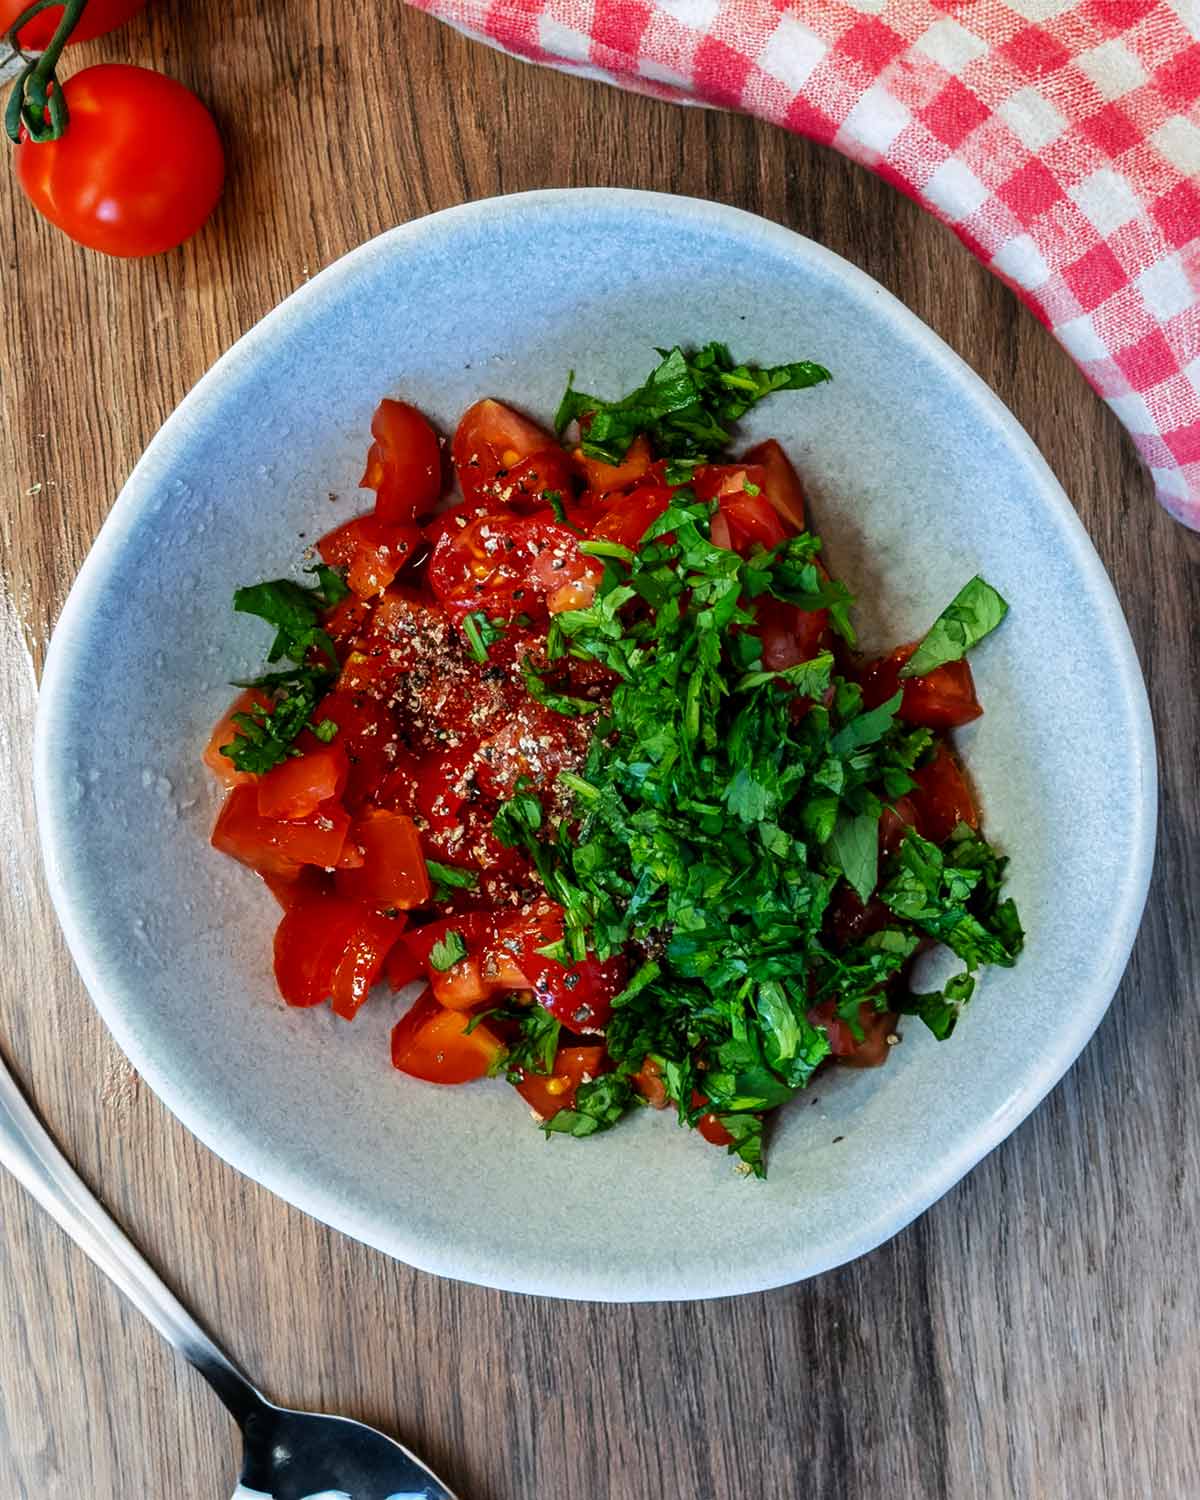 Diced tomatoes and chopped coriander in a bowl.